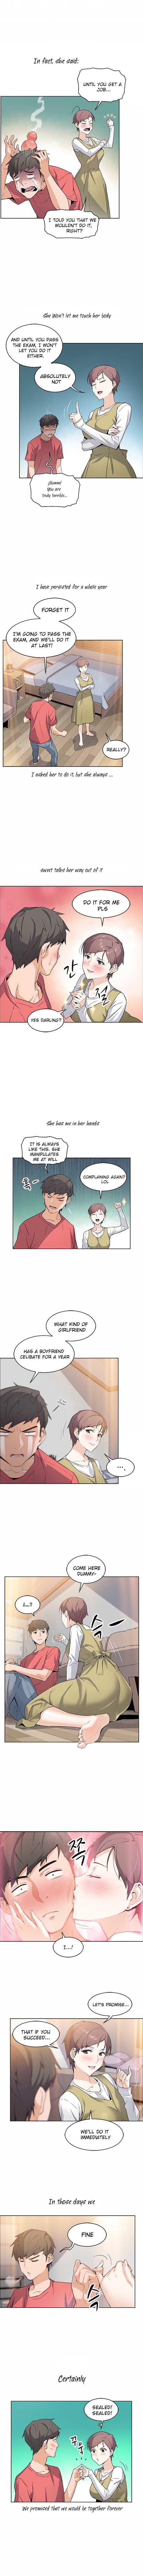 Girlongirl Housekeeper [Neck Pillow, Paper] Ch.49/49 [English] [Manhwa PDF] Completed Firsttime - Page 7